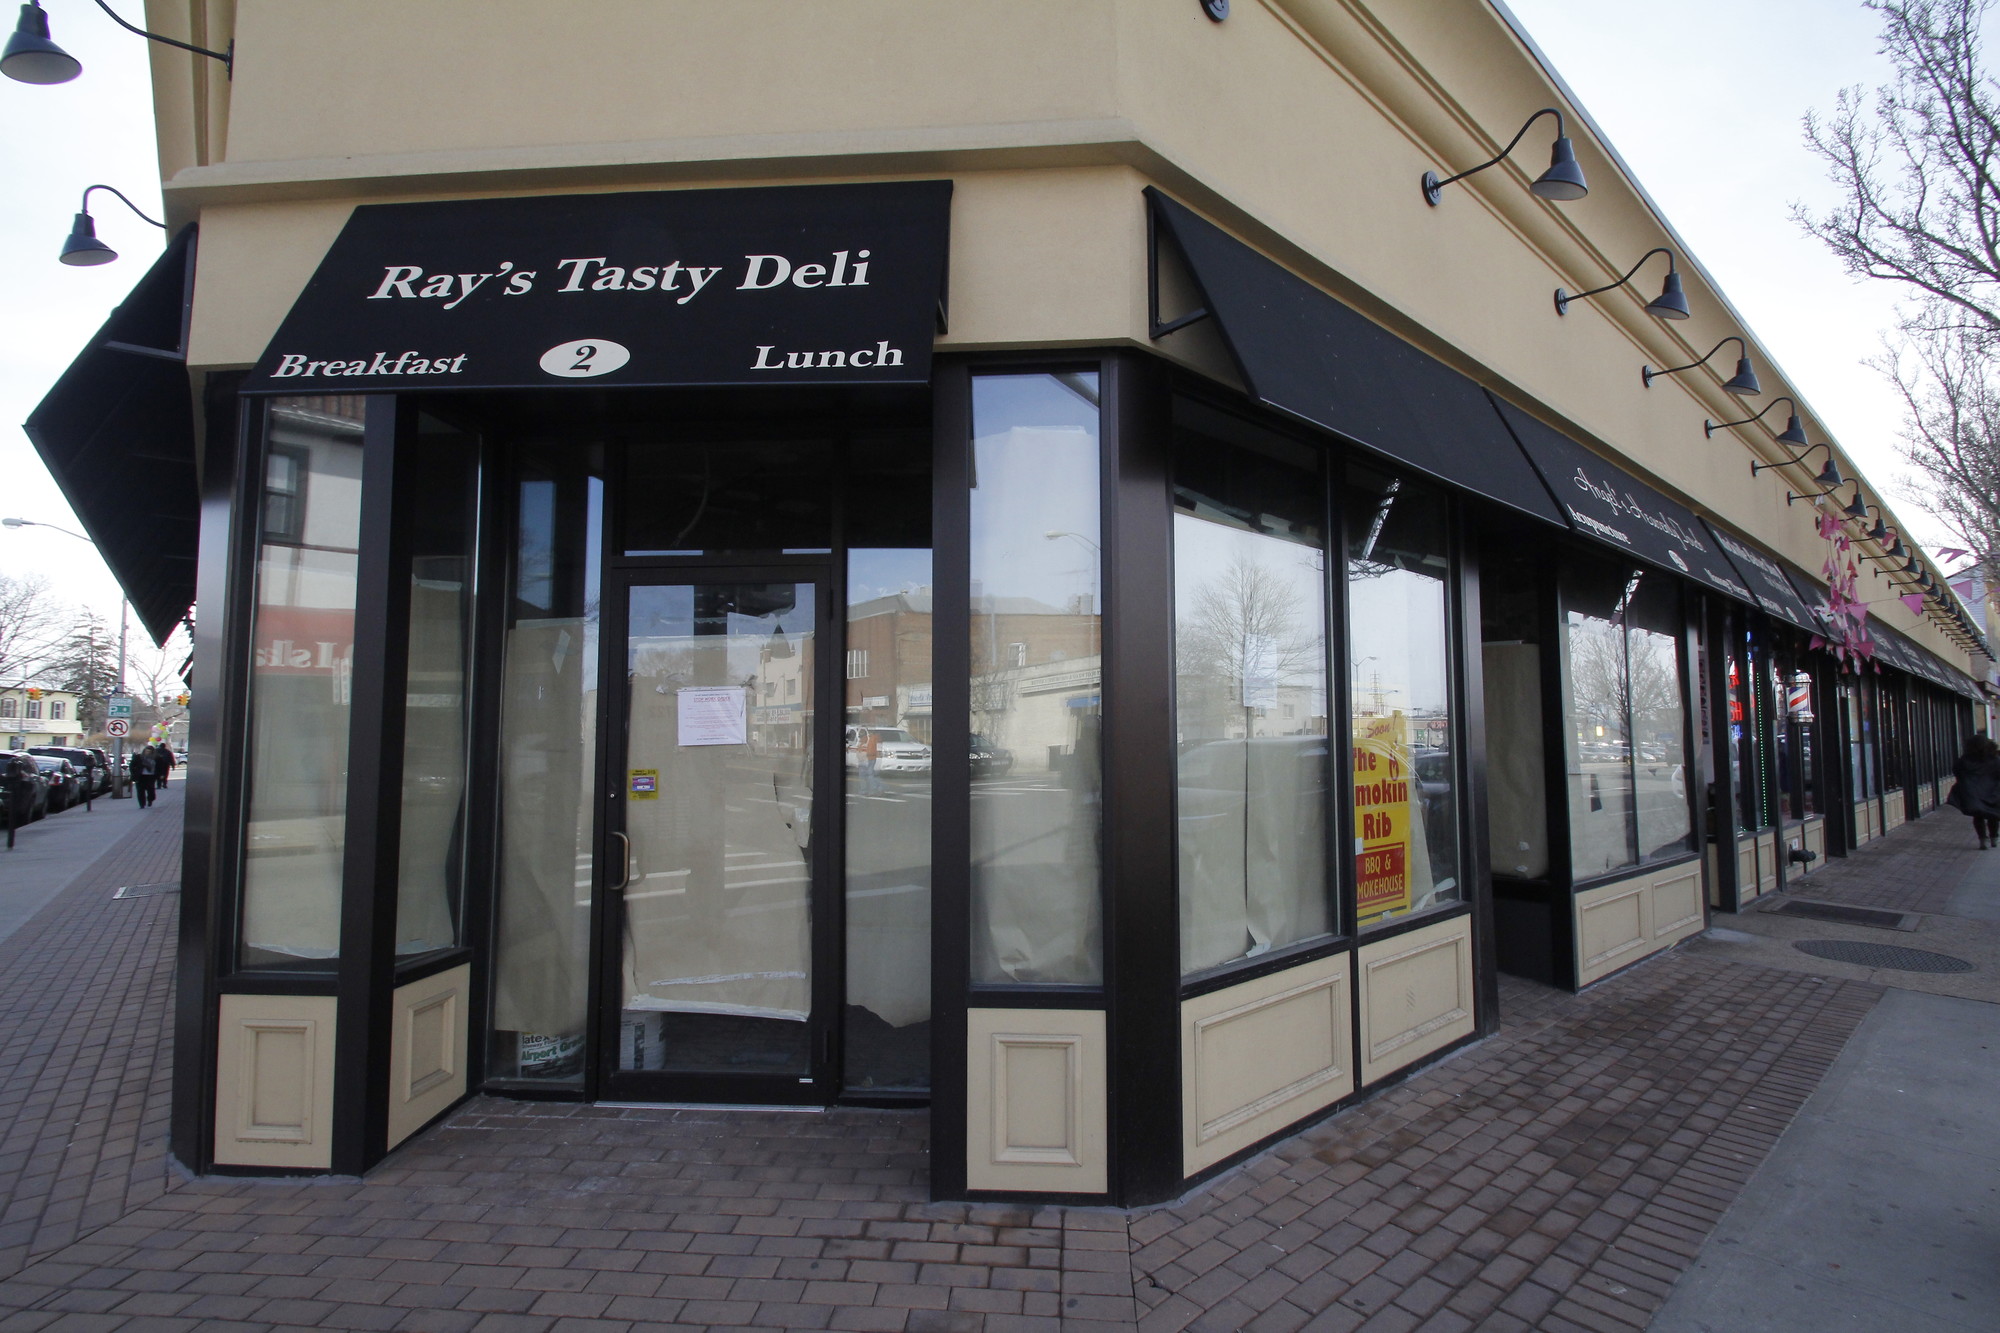 The BZA approved a barbecue restaurant at the corner of South Village Avenue and Merrick Road, where Ray’s Tasty Deli used to be.